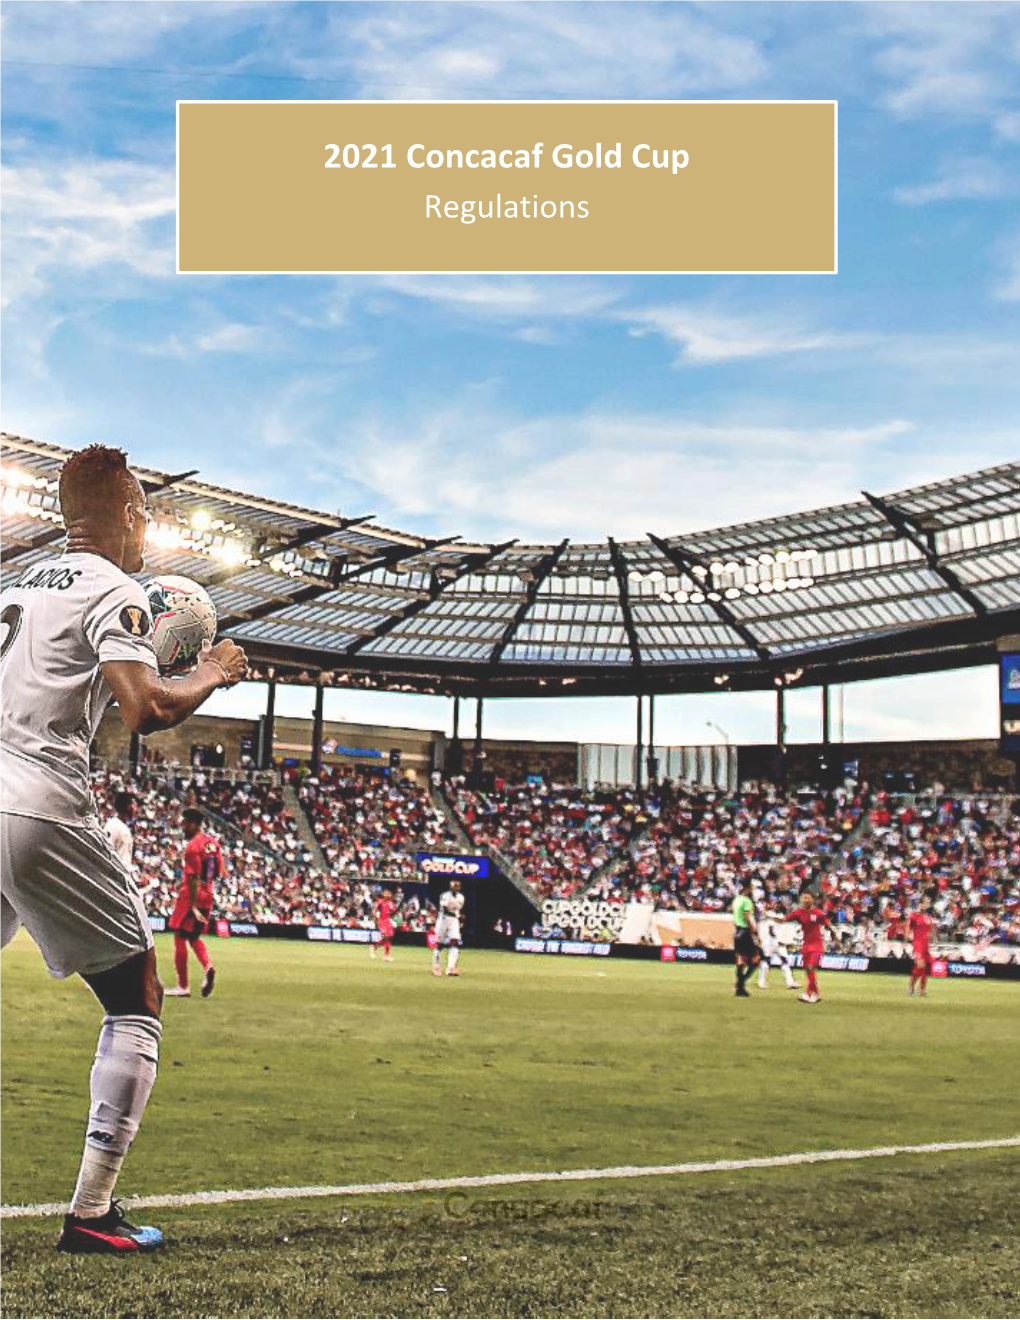 2021 Concacaf Gold Cup Regulations GOLD CUP REGULATIONS 2021